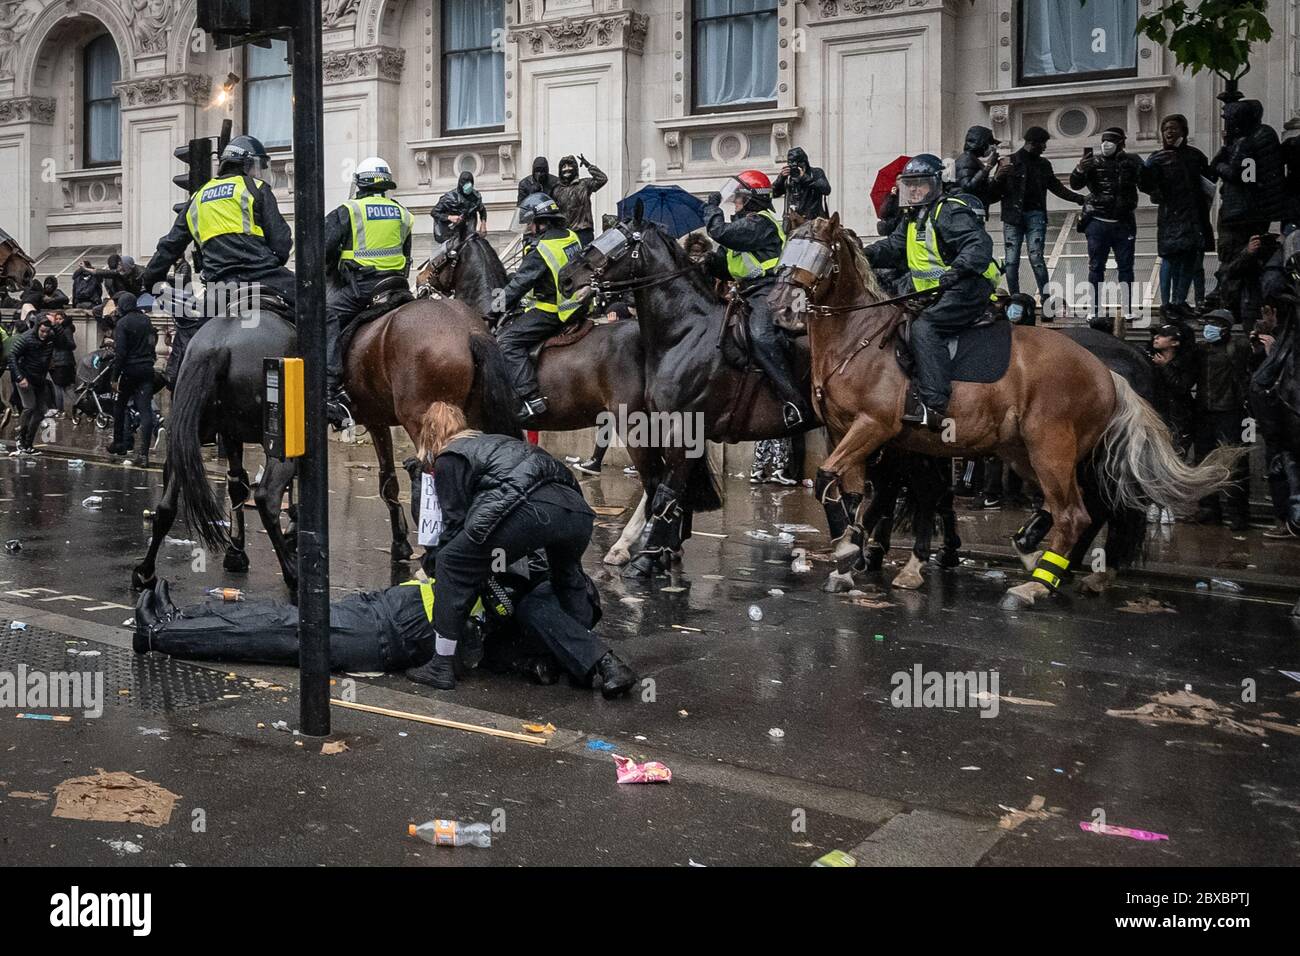 A police officer lies unconscious after being thrown from their horse during clashes which erupted during Black Lives Matter protests in Westminster. Flares, bottles and other debris where thrown at police after thousands of Black Lives Matter activists and supporters packed into Parliament Square. London, UK. Stock Photo